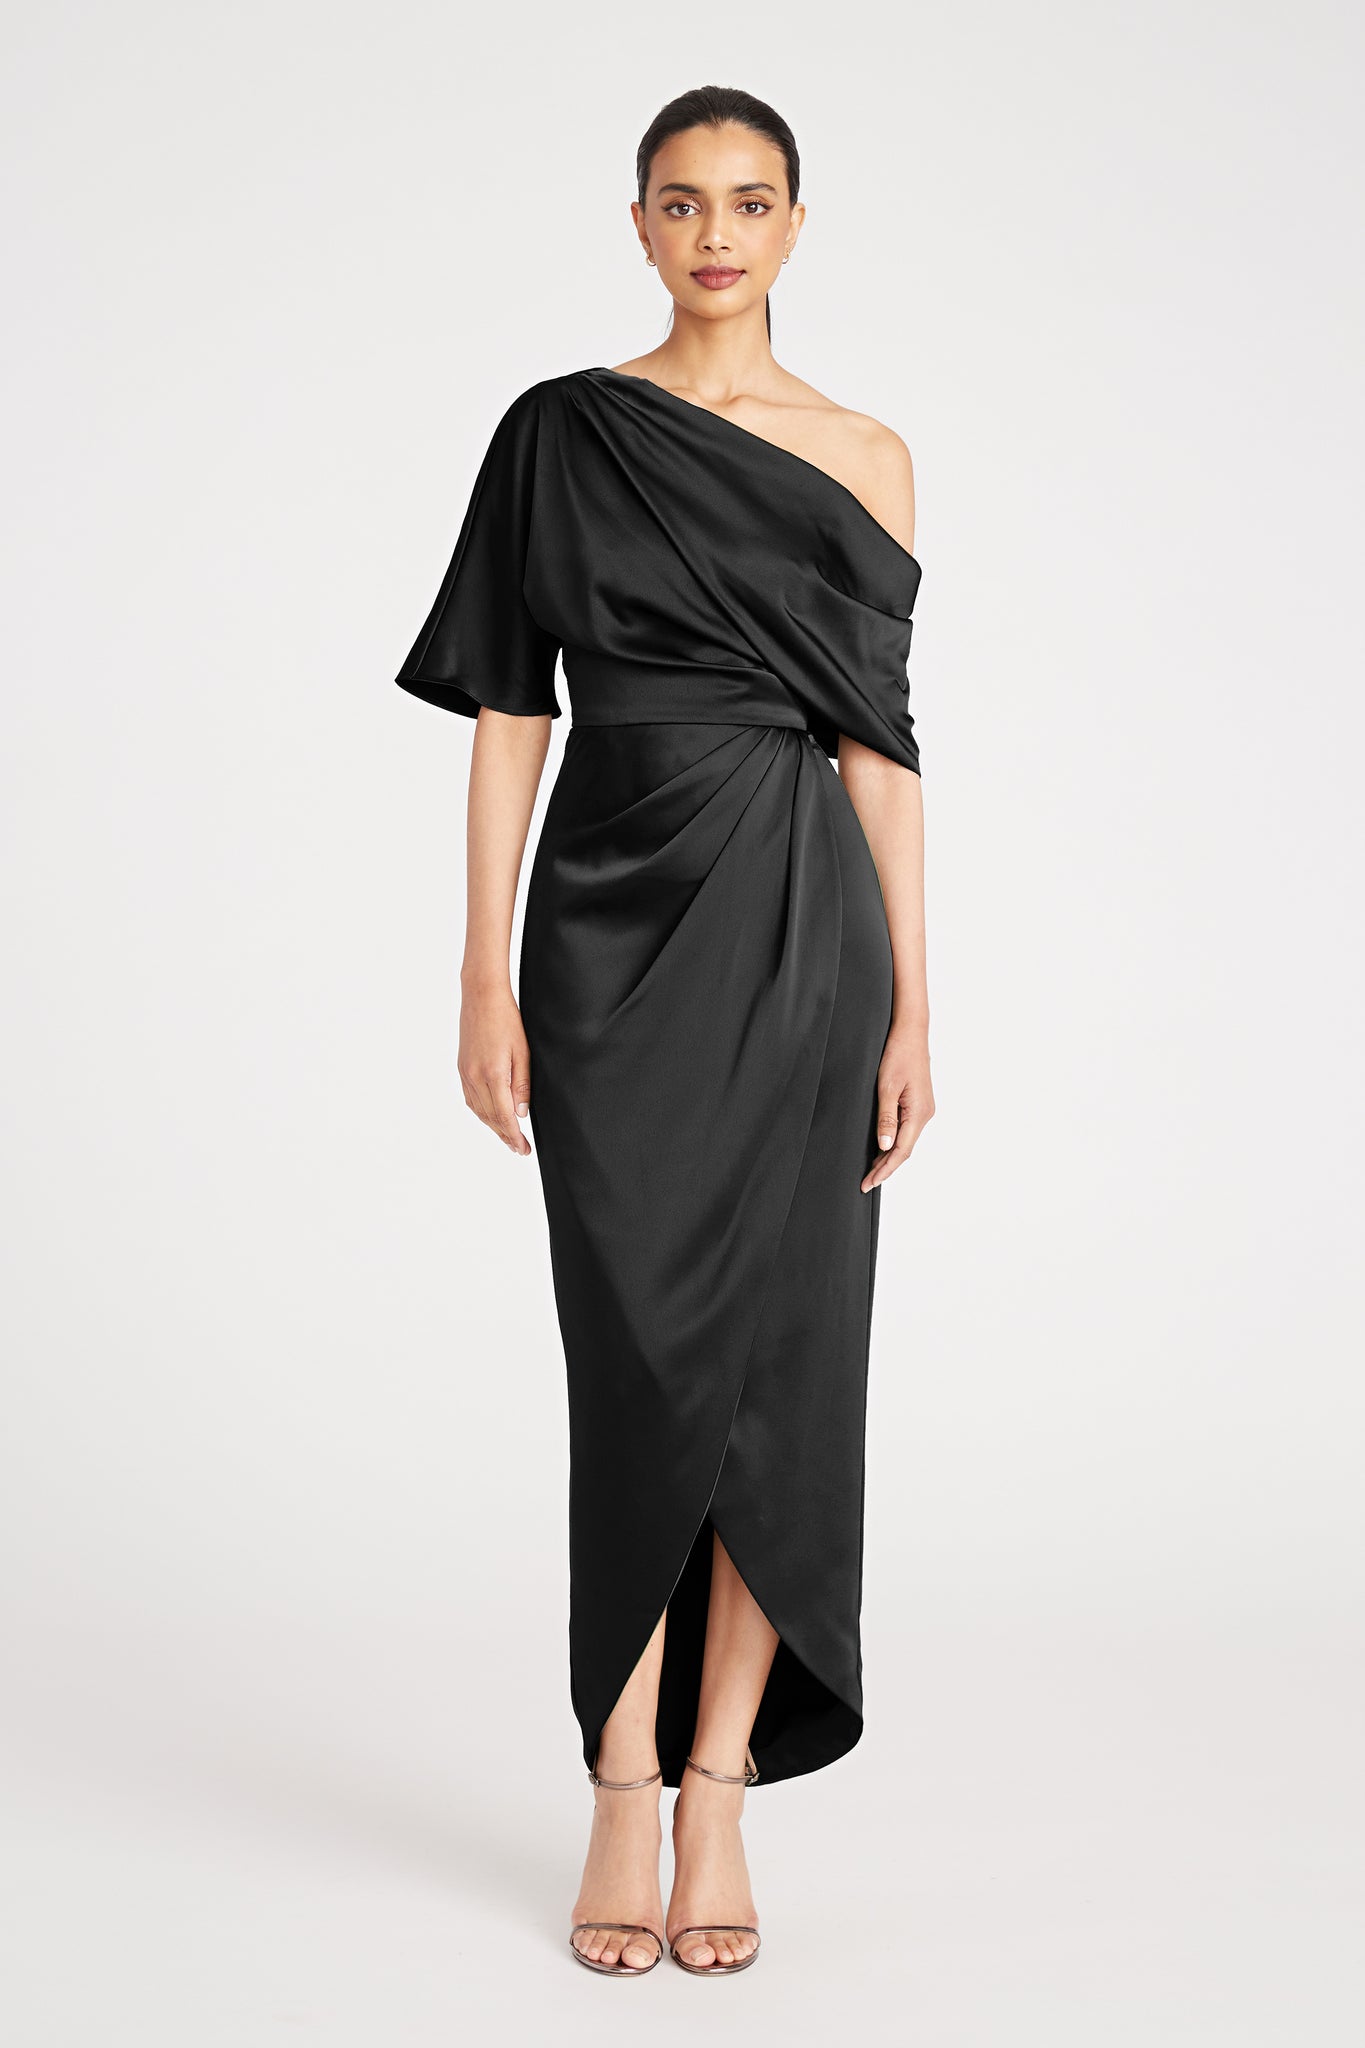 RAYNA ONE SHOULDER DRAPED GOWN